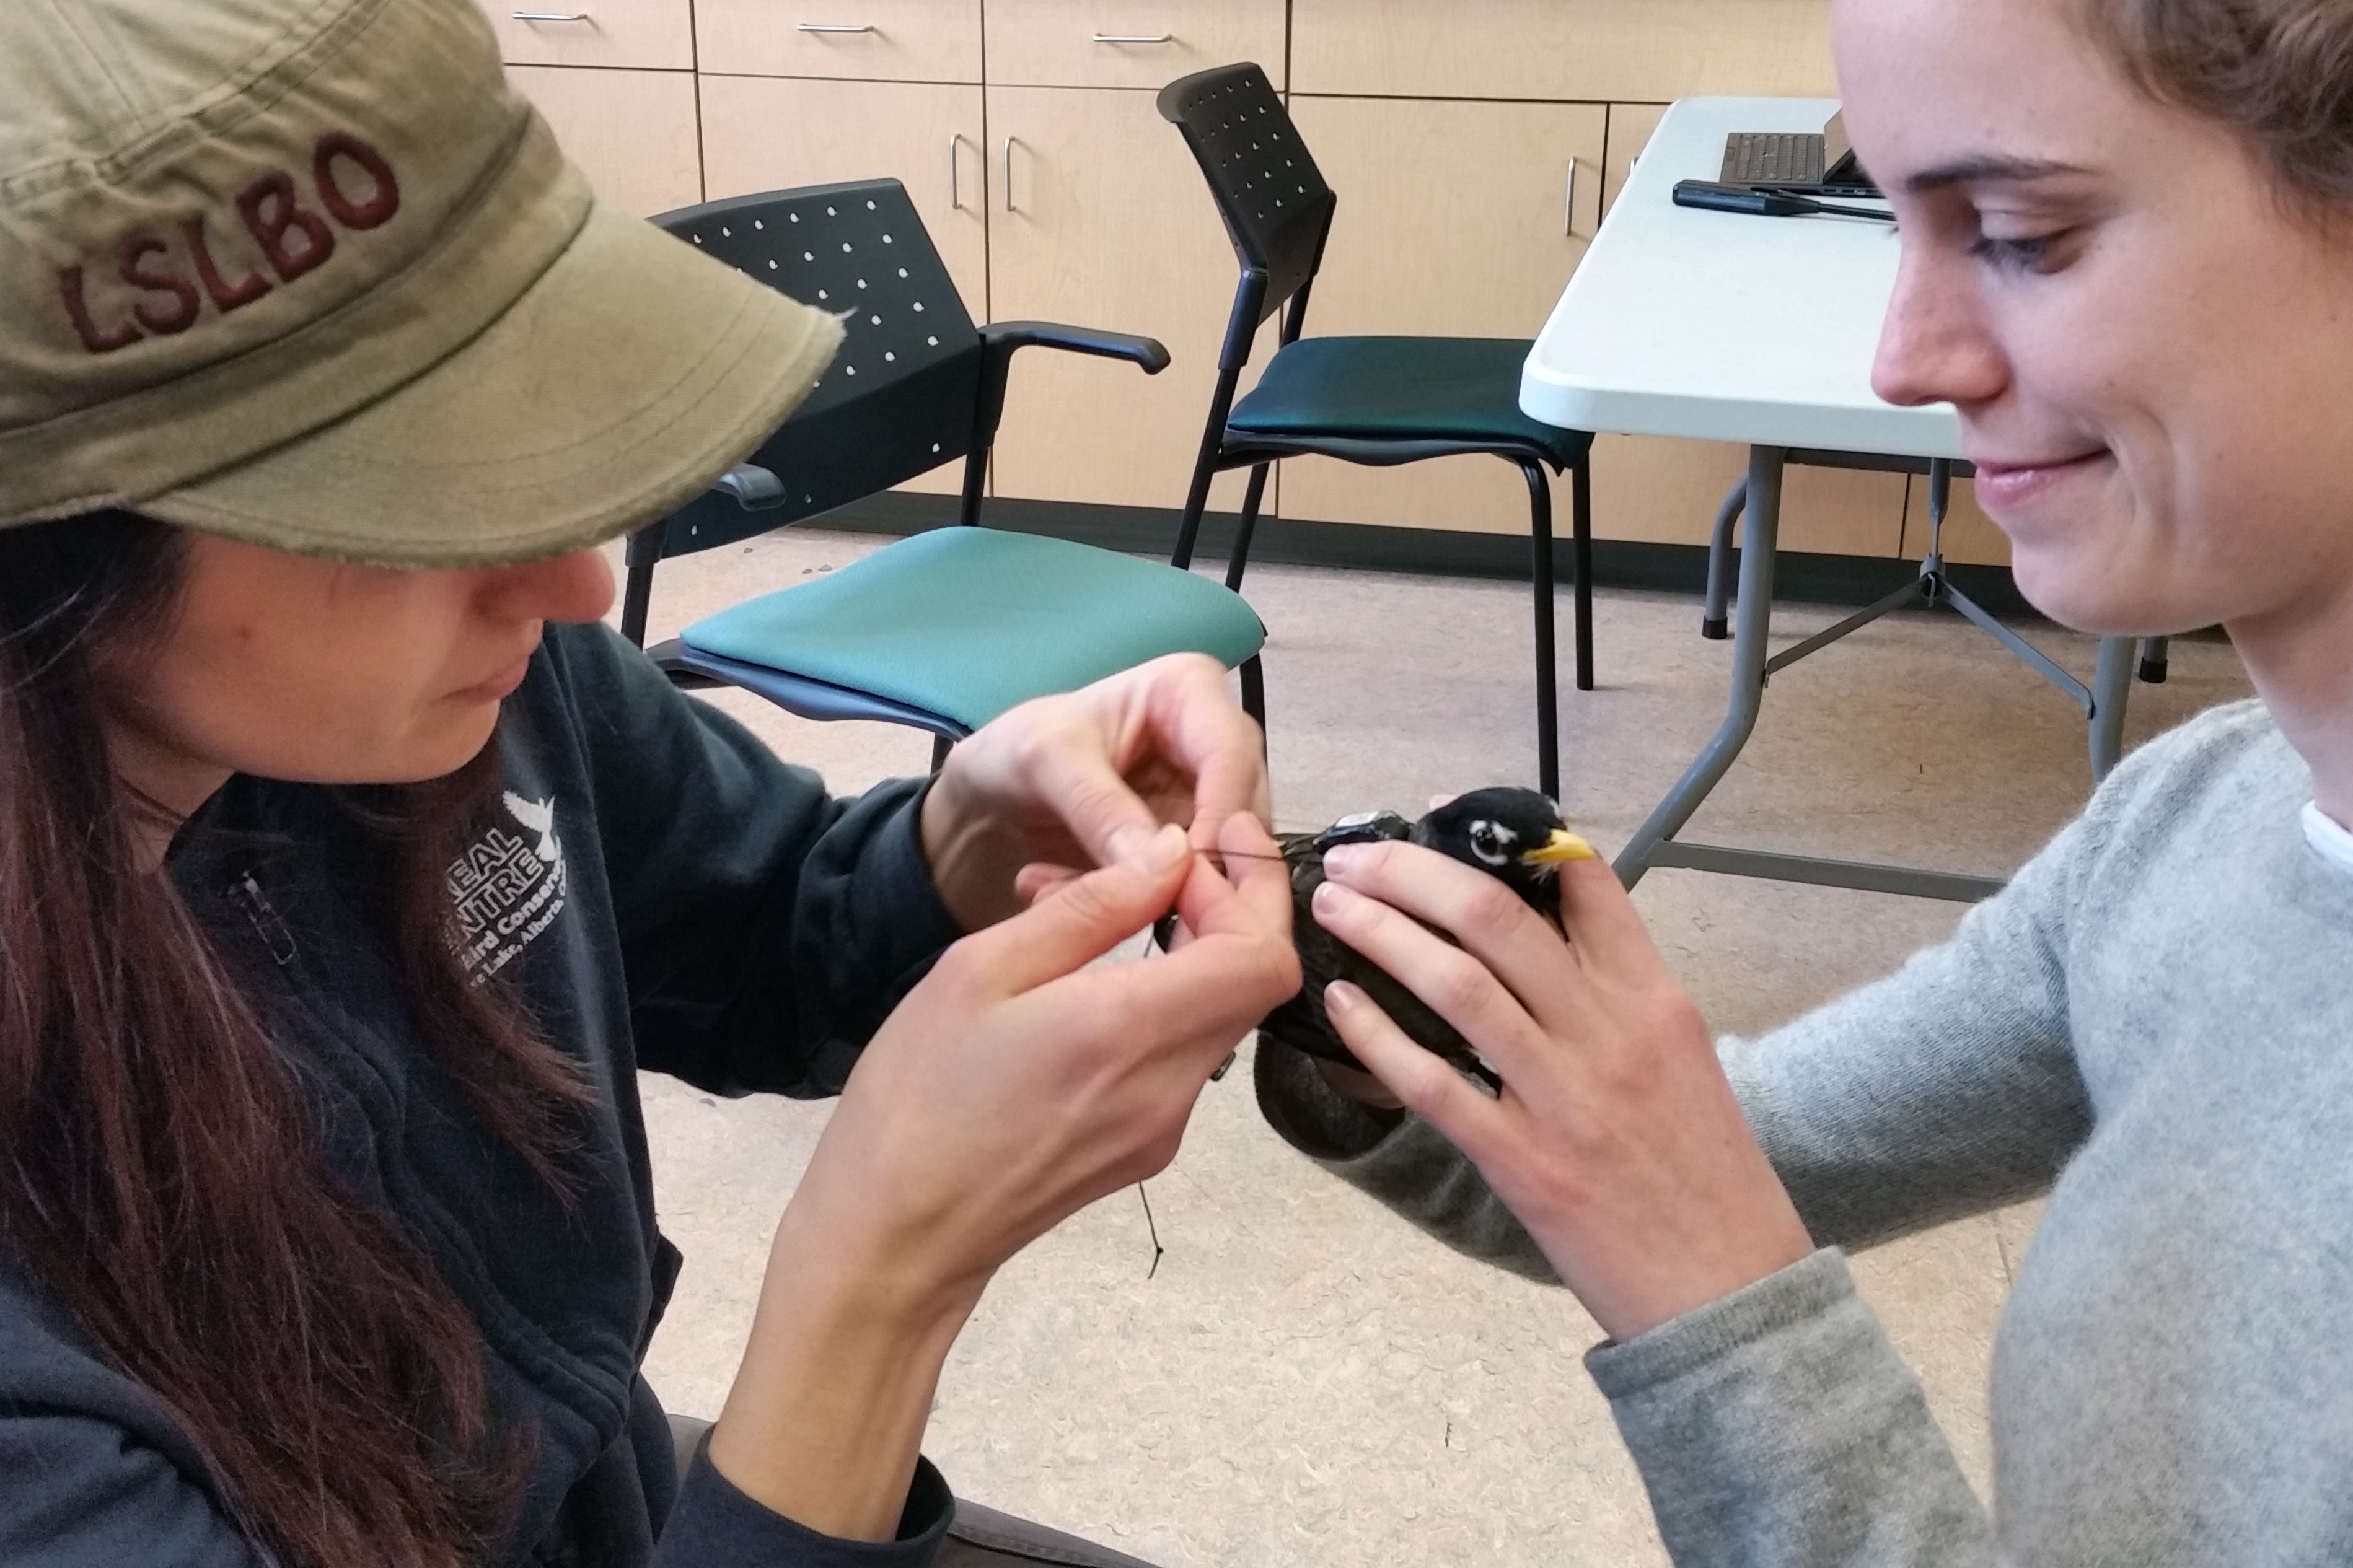 Ruth Oliver, left, and Nicole Kirkun fit a robin with a harness in April of 2017 at the Boreal Centre for Bird Conservation in Slave Lake, Alberta. (Kitty Oliver)